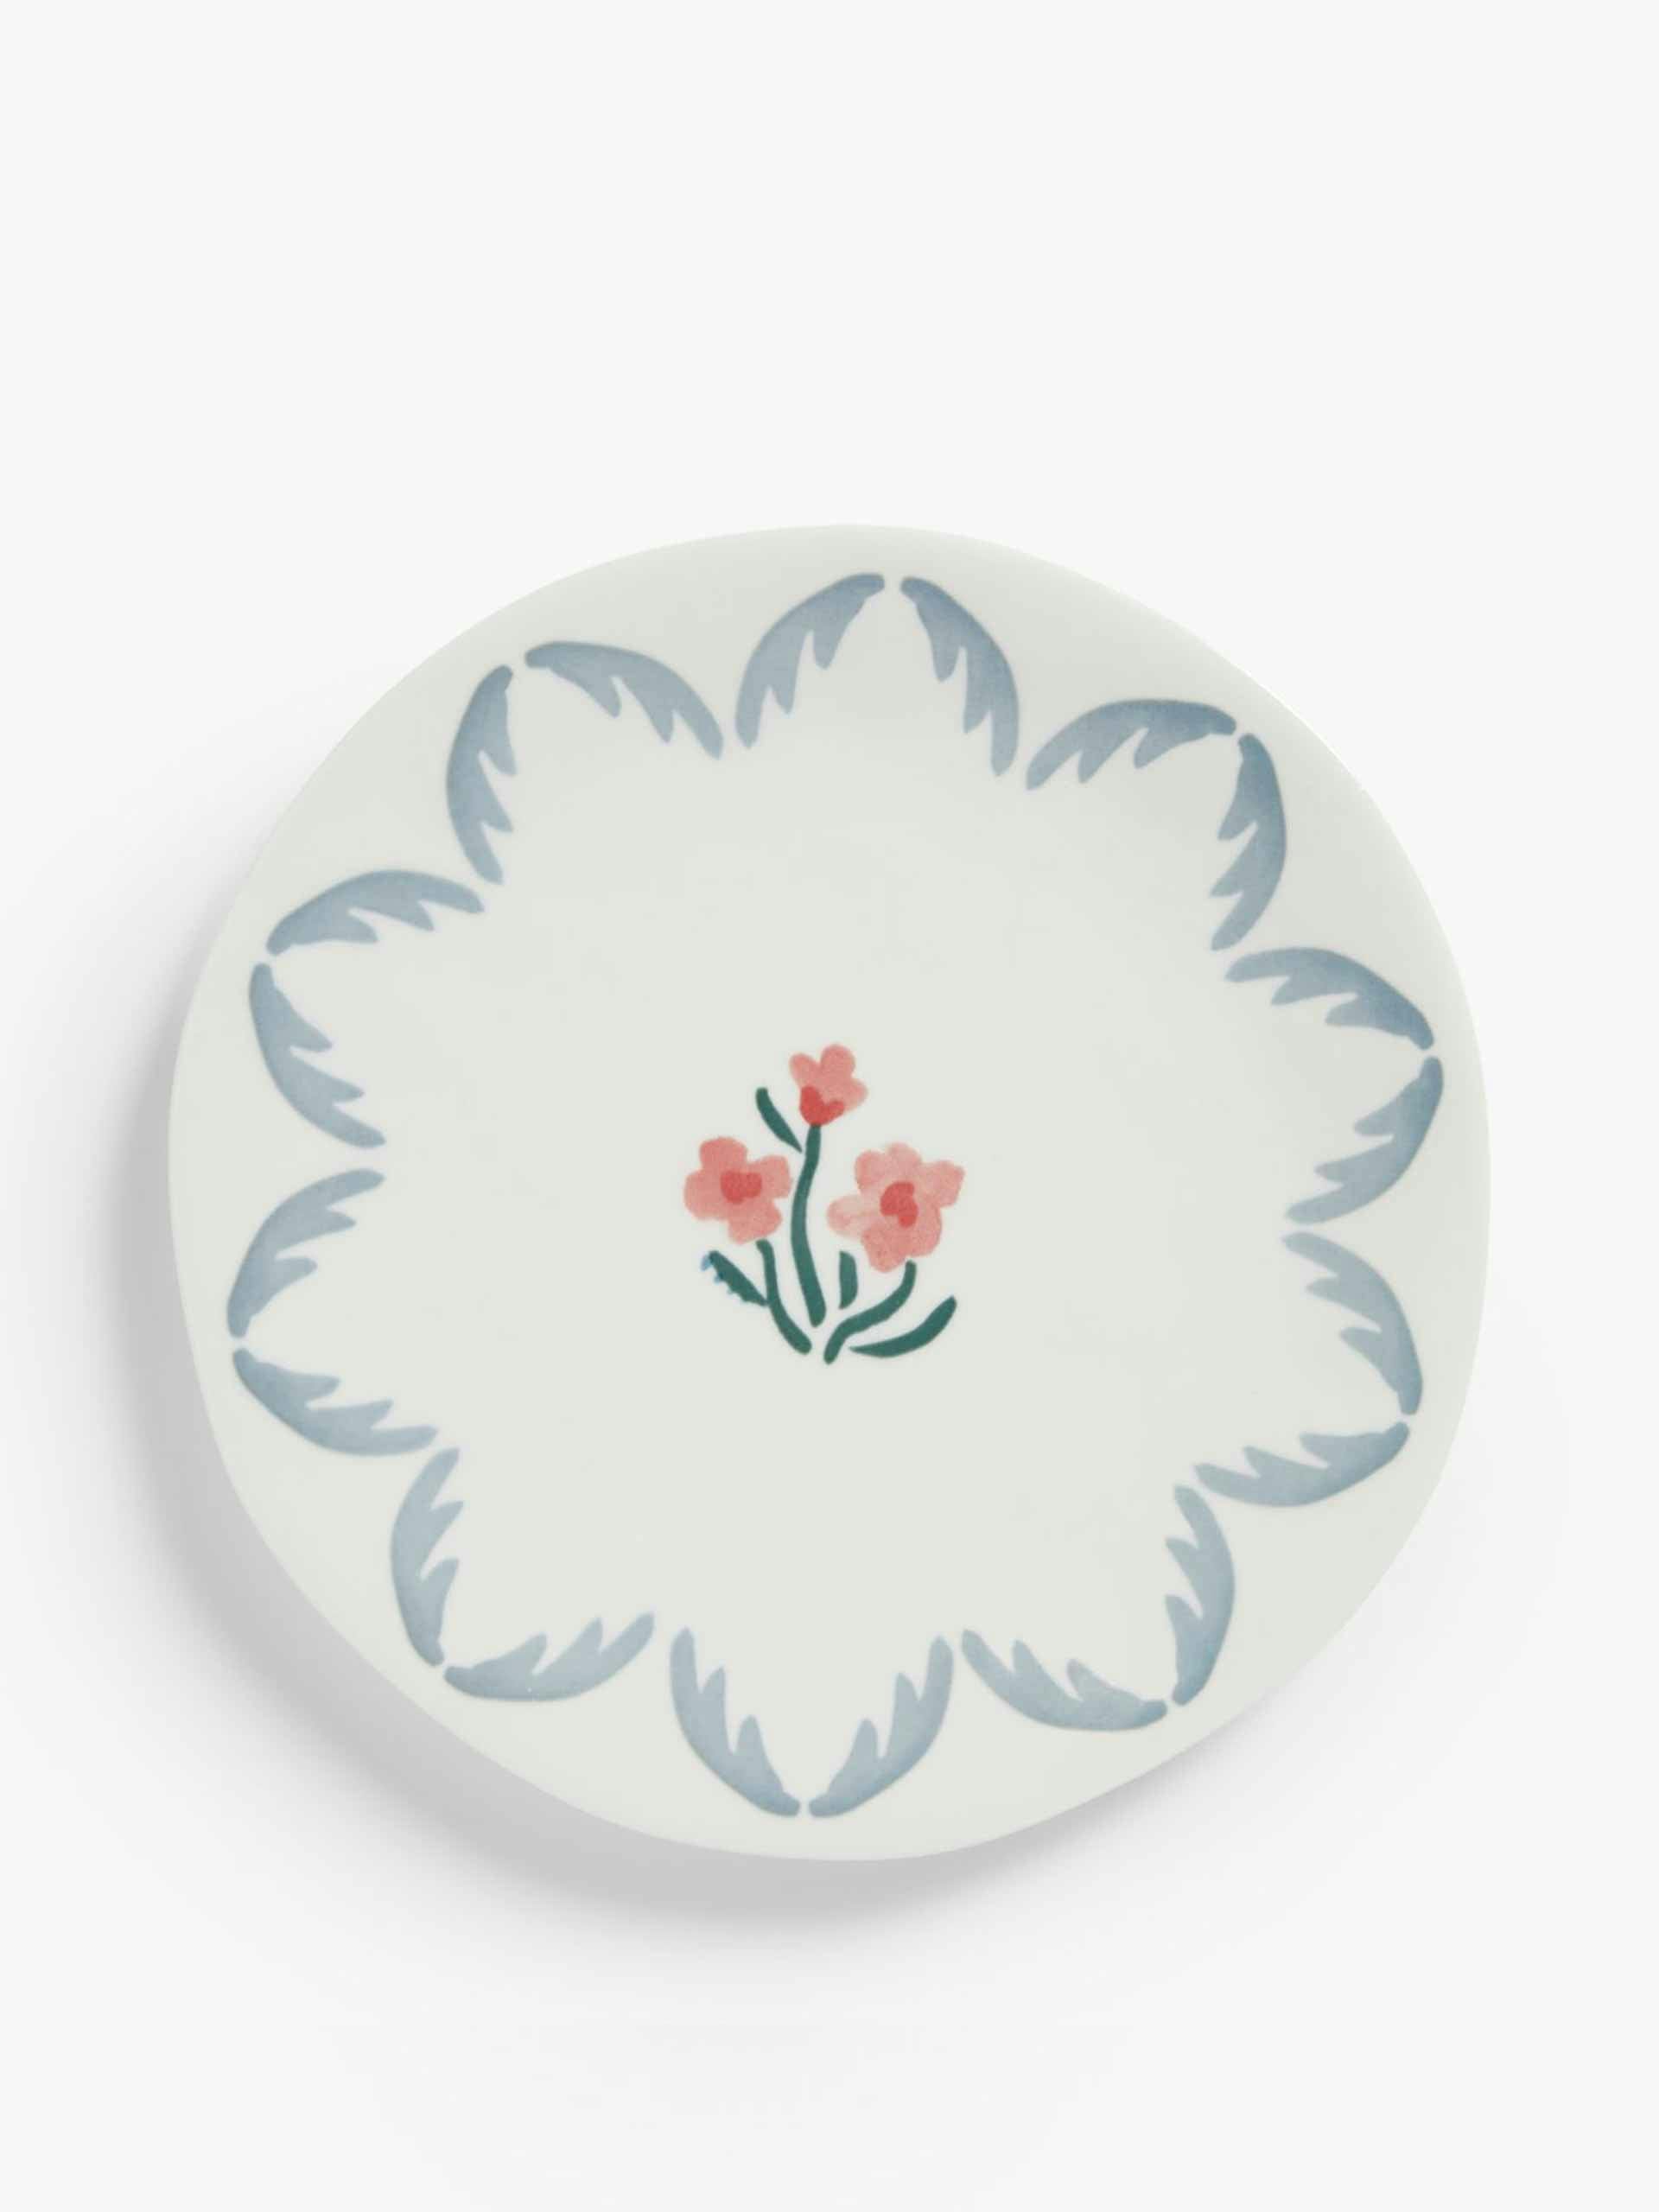 Floral china side plate